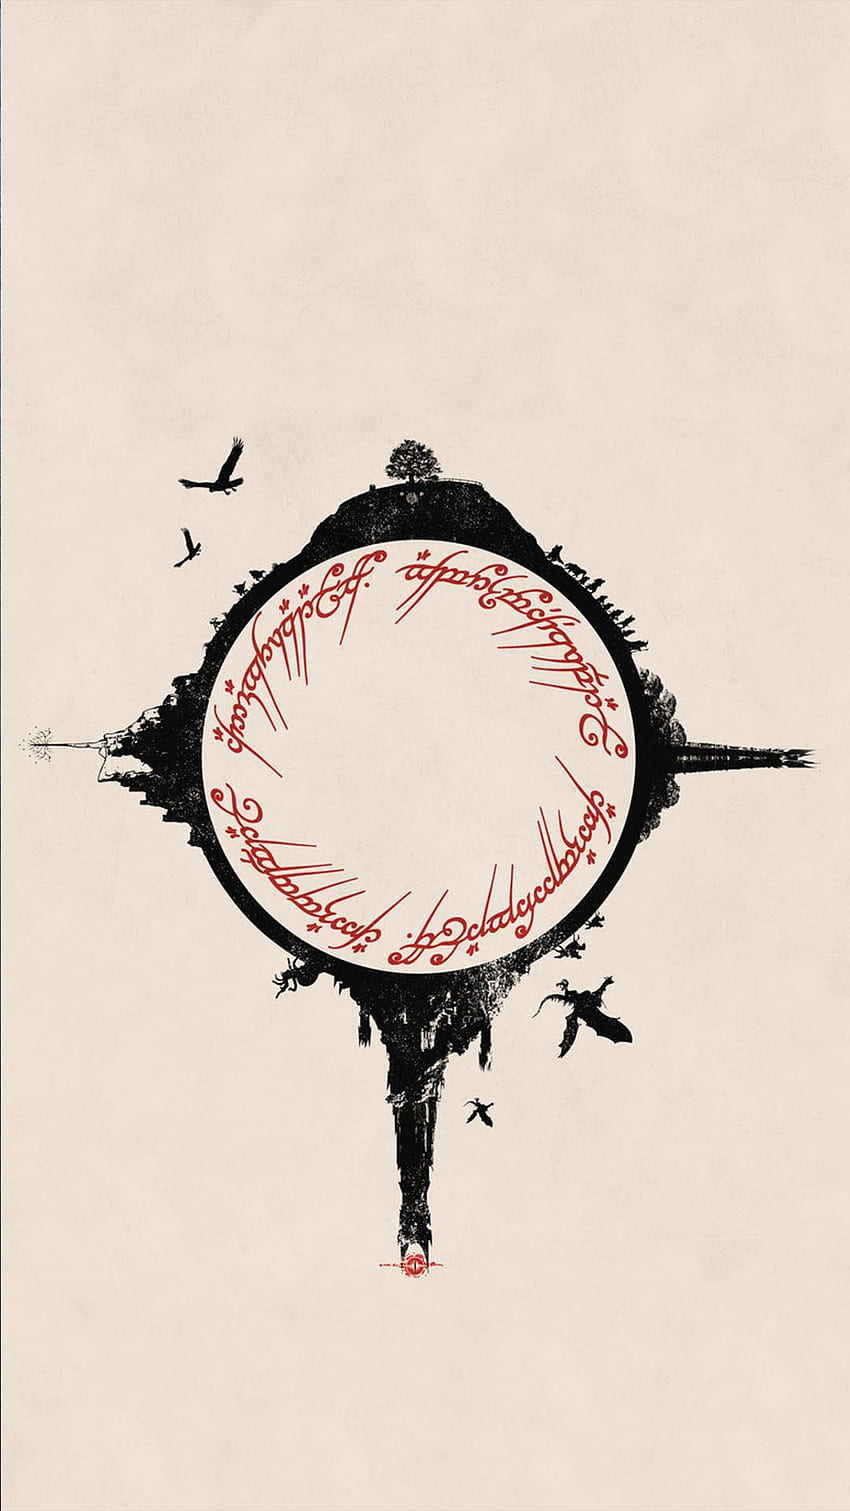 I want to get a LOTR tattoo and designed this minimalist concept  rlotr